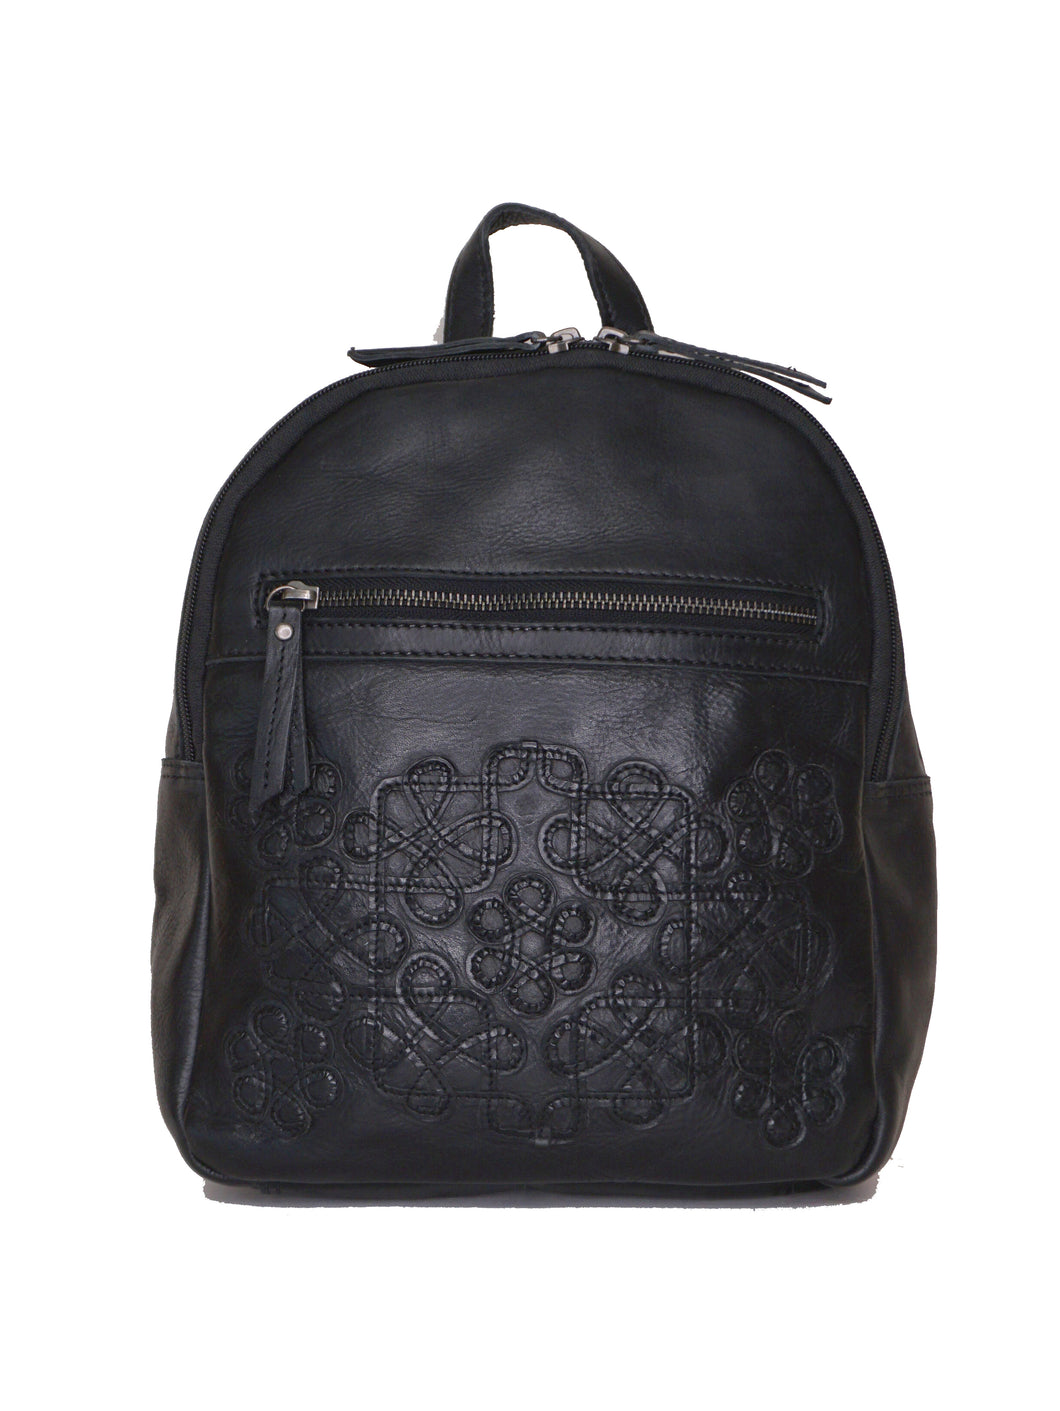 20% OFF - Windsor Royale ( Soft Cow Leather) - Backpack